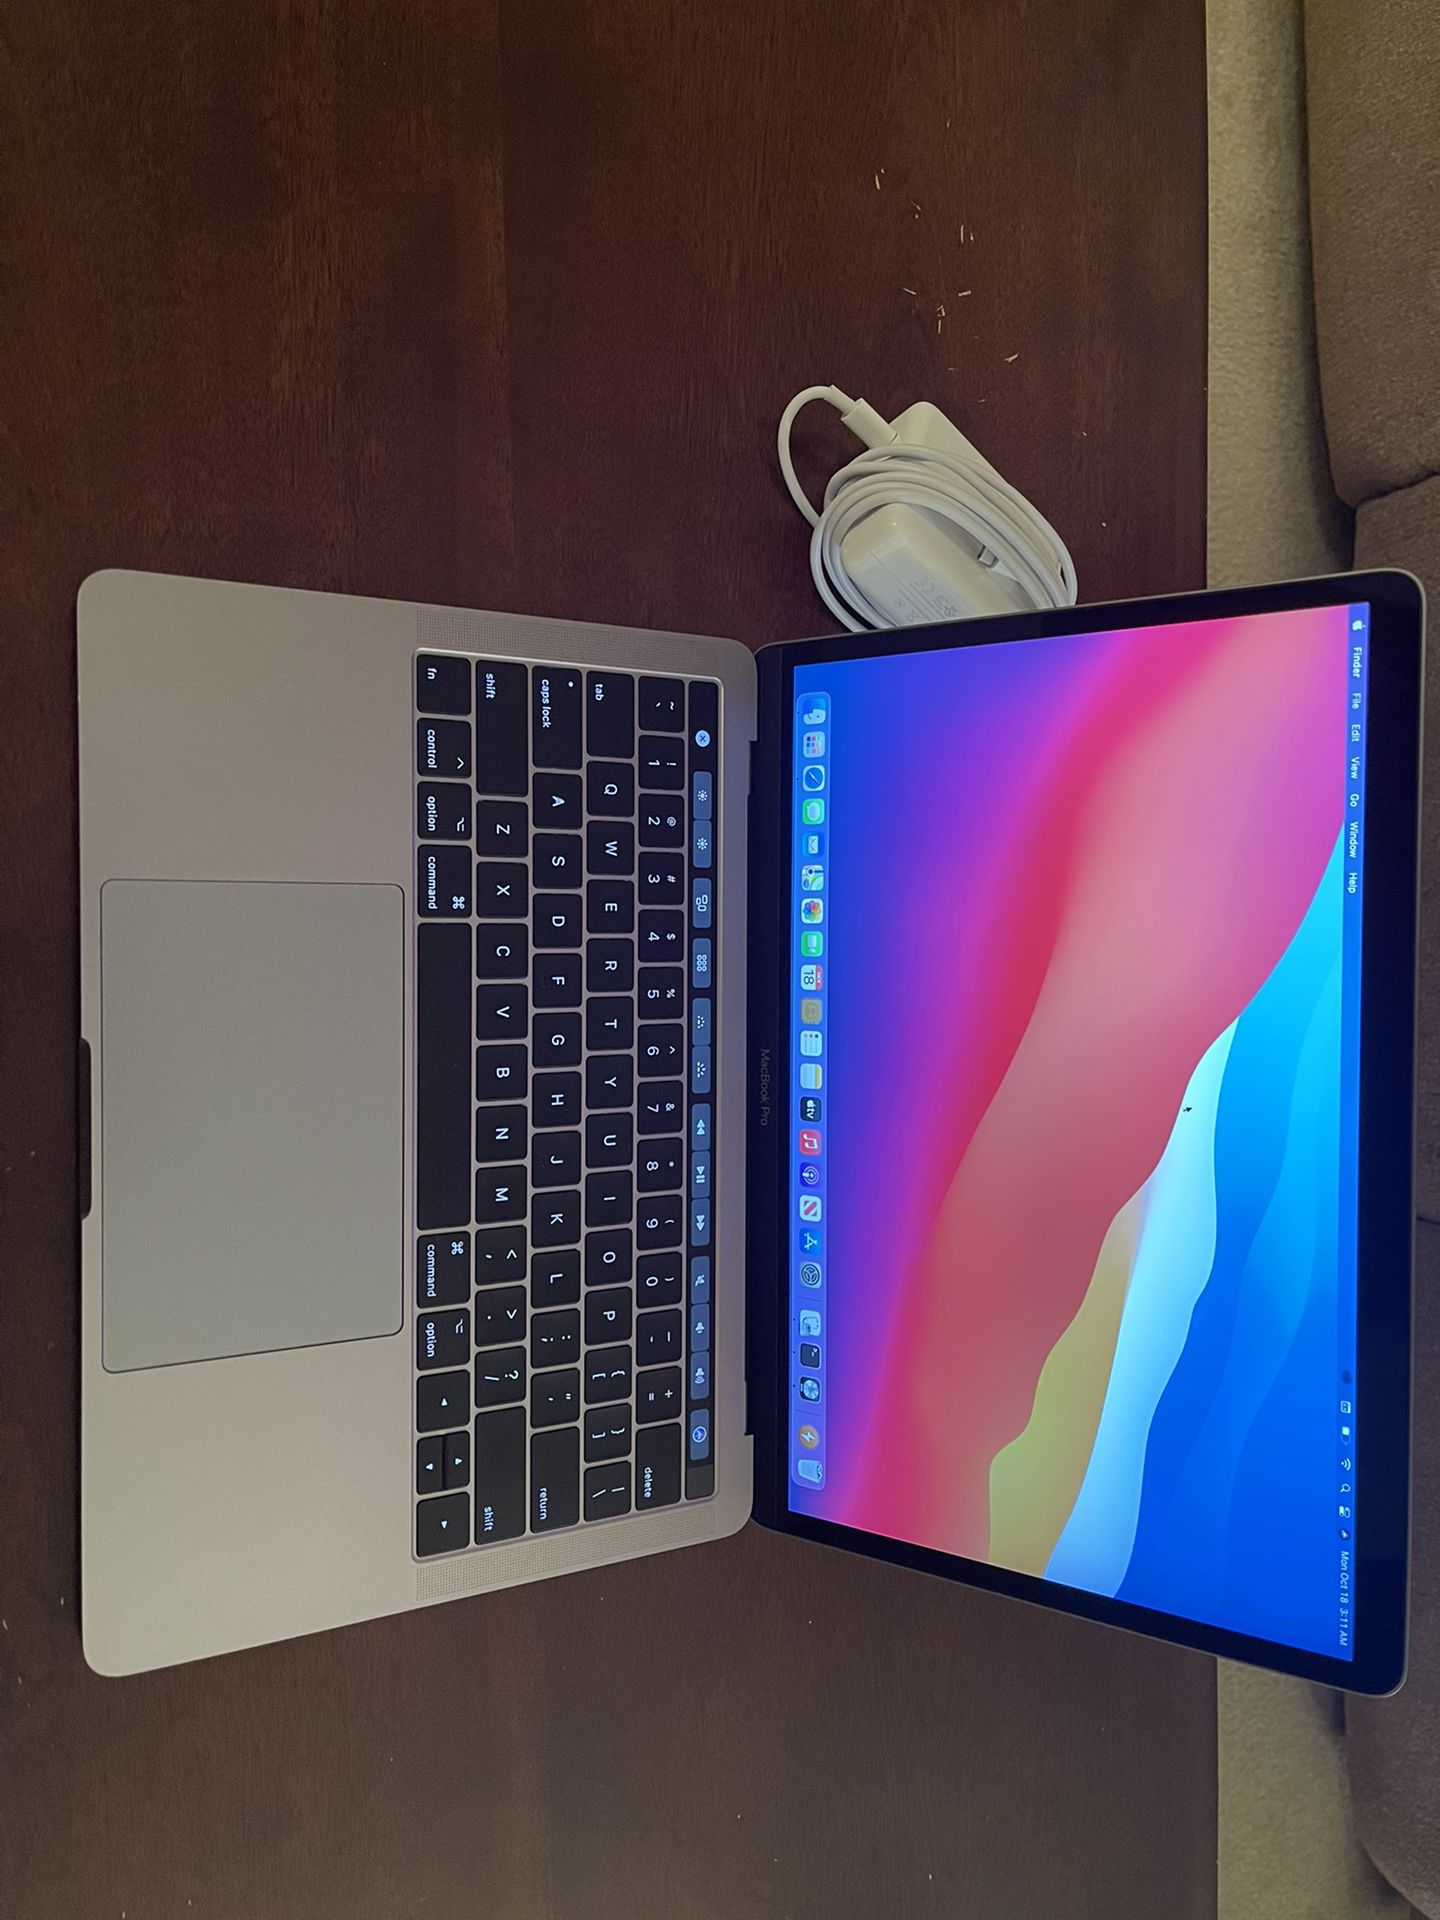 2017 MacBook Pro 13” retina,i7  3.5ghz, 16gb Ram, 512gb SSD, Touch Bar /ID, Top Of The Line